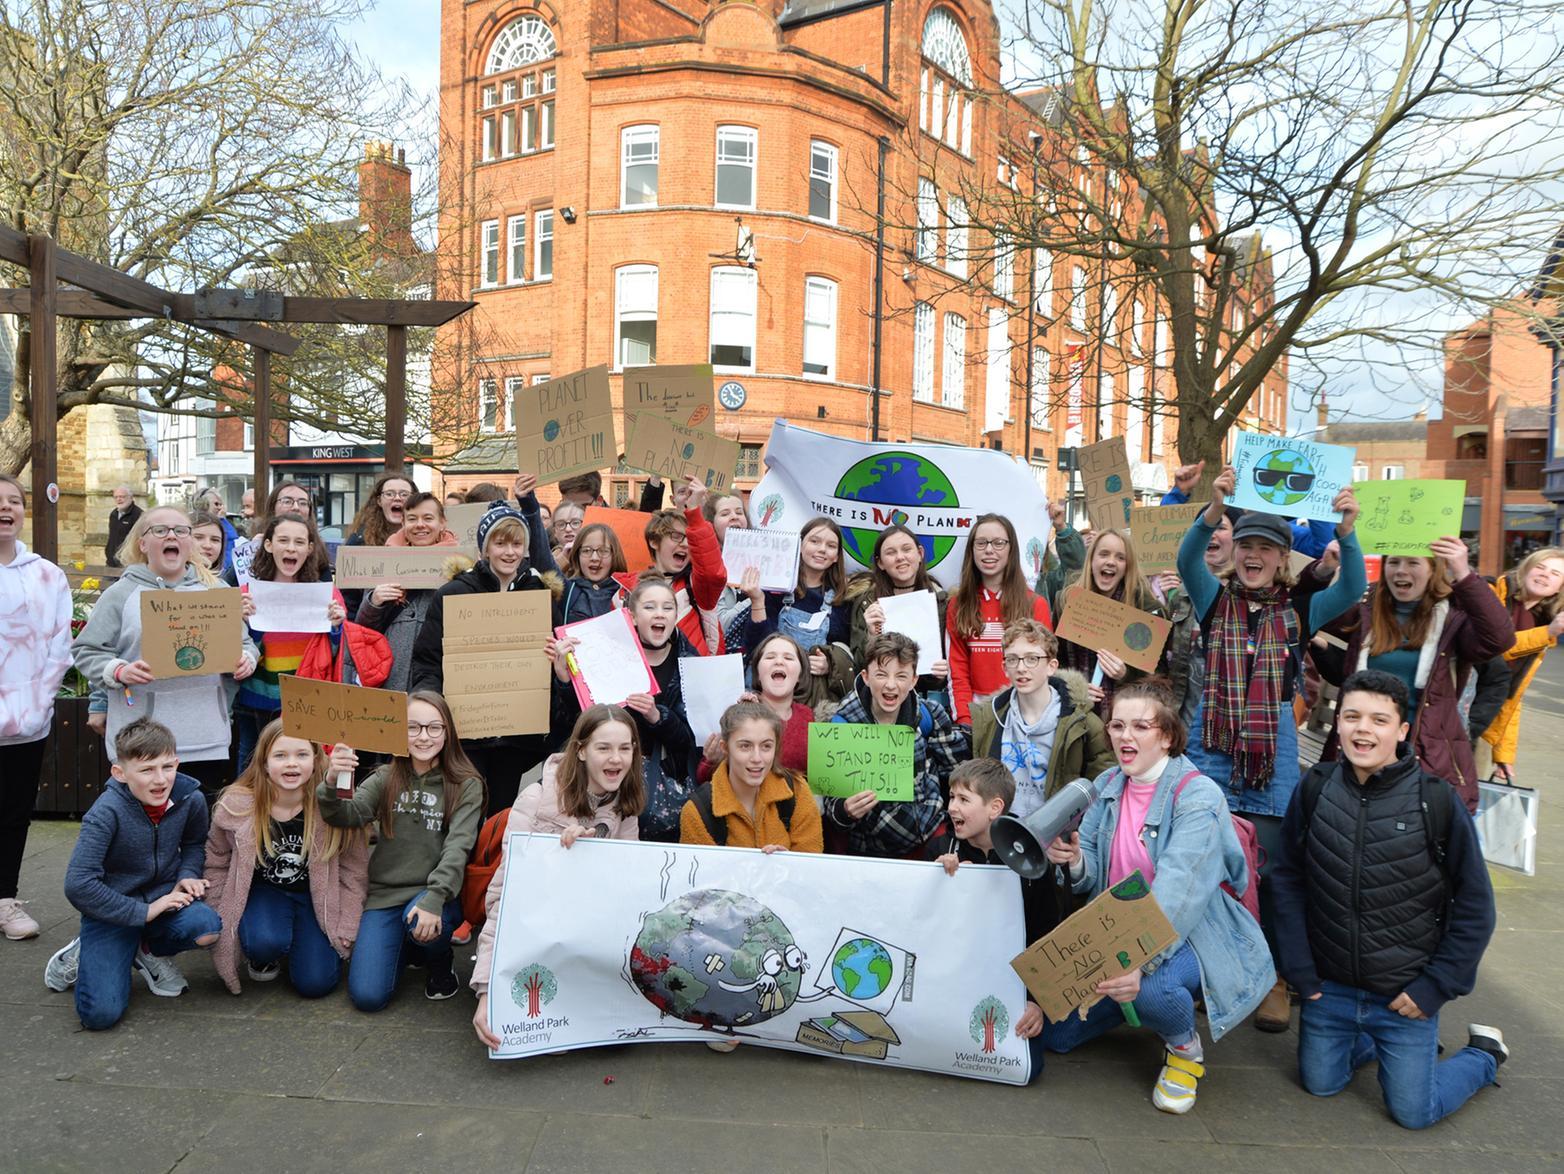 Students from two Market Harborough schools headed into the town centre after lessons to protest for more action to combat climate change. See the third photo on the gallery (March) for more.